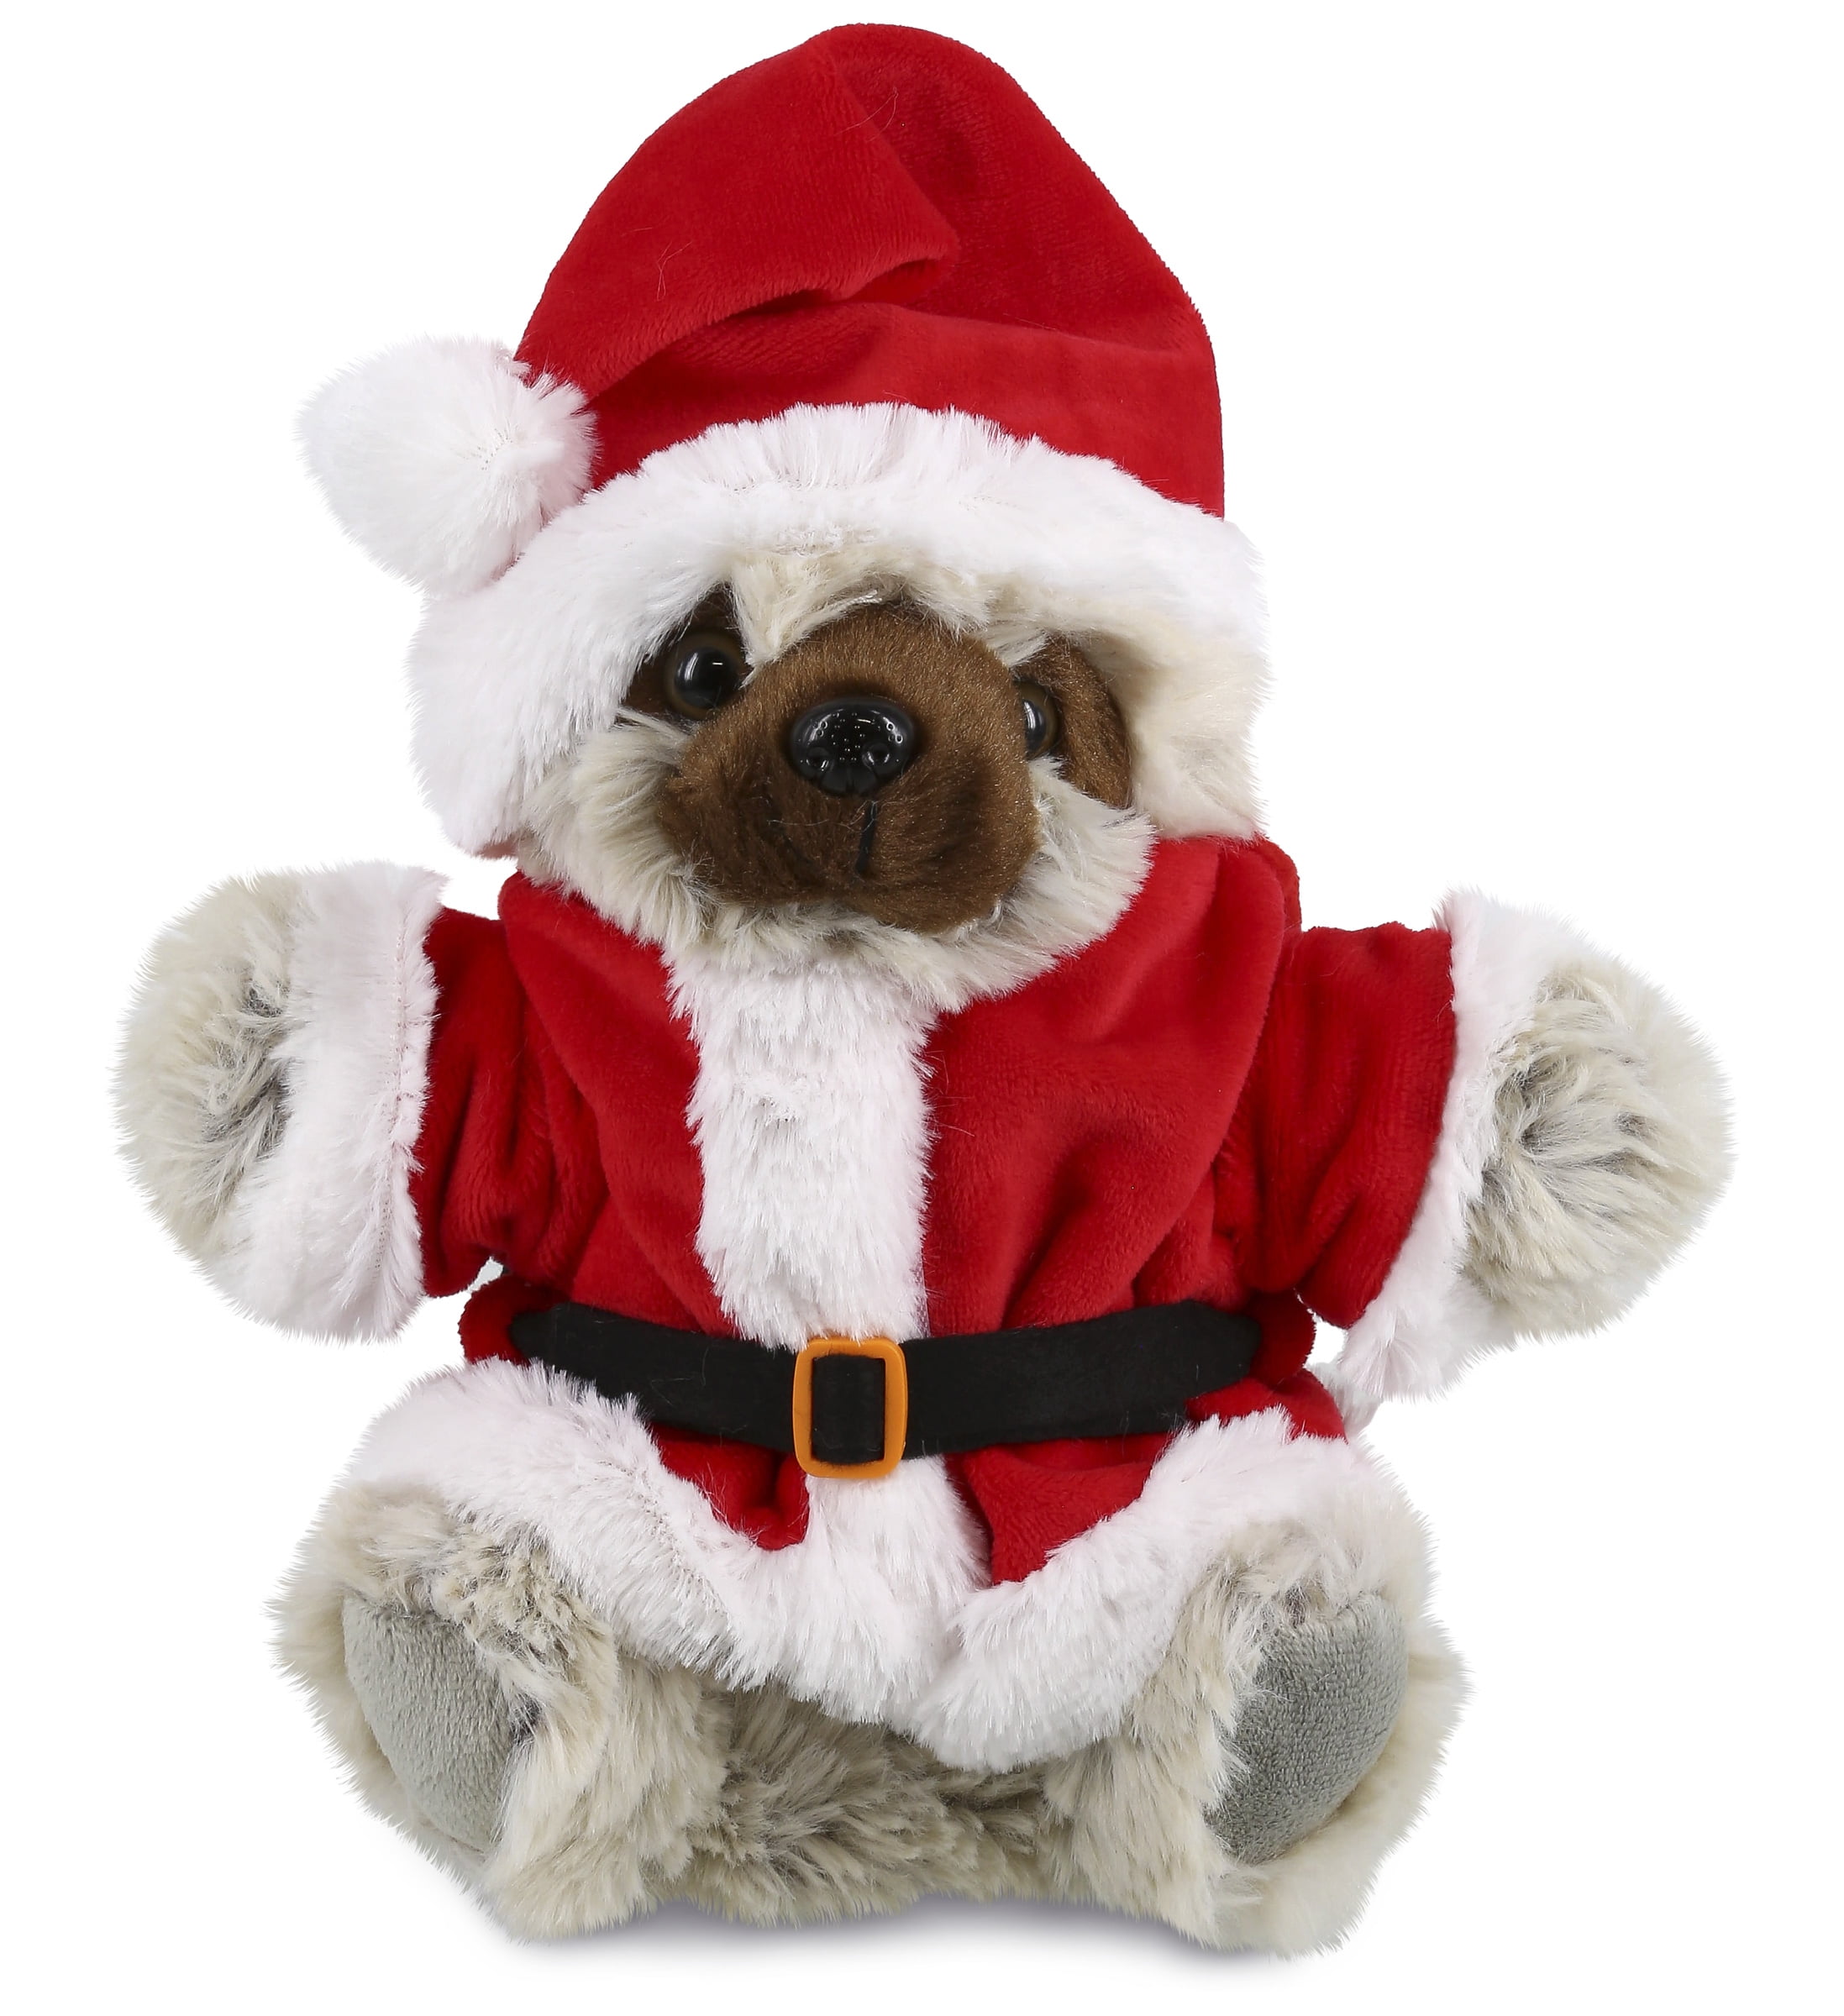 DolliBu Santa Sloth Stuffed Animal Plush Hand Puppet - Super Soft Wild  Animal Dress Up with Red Santa Claus Outfit, Cute Holiday Christmas Gift -  9 Inches 